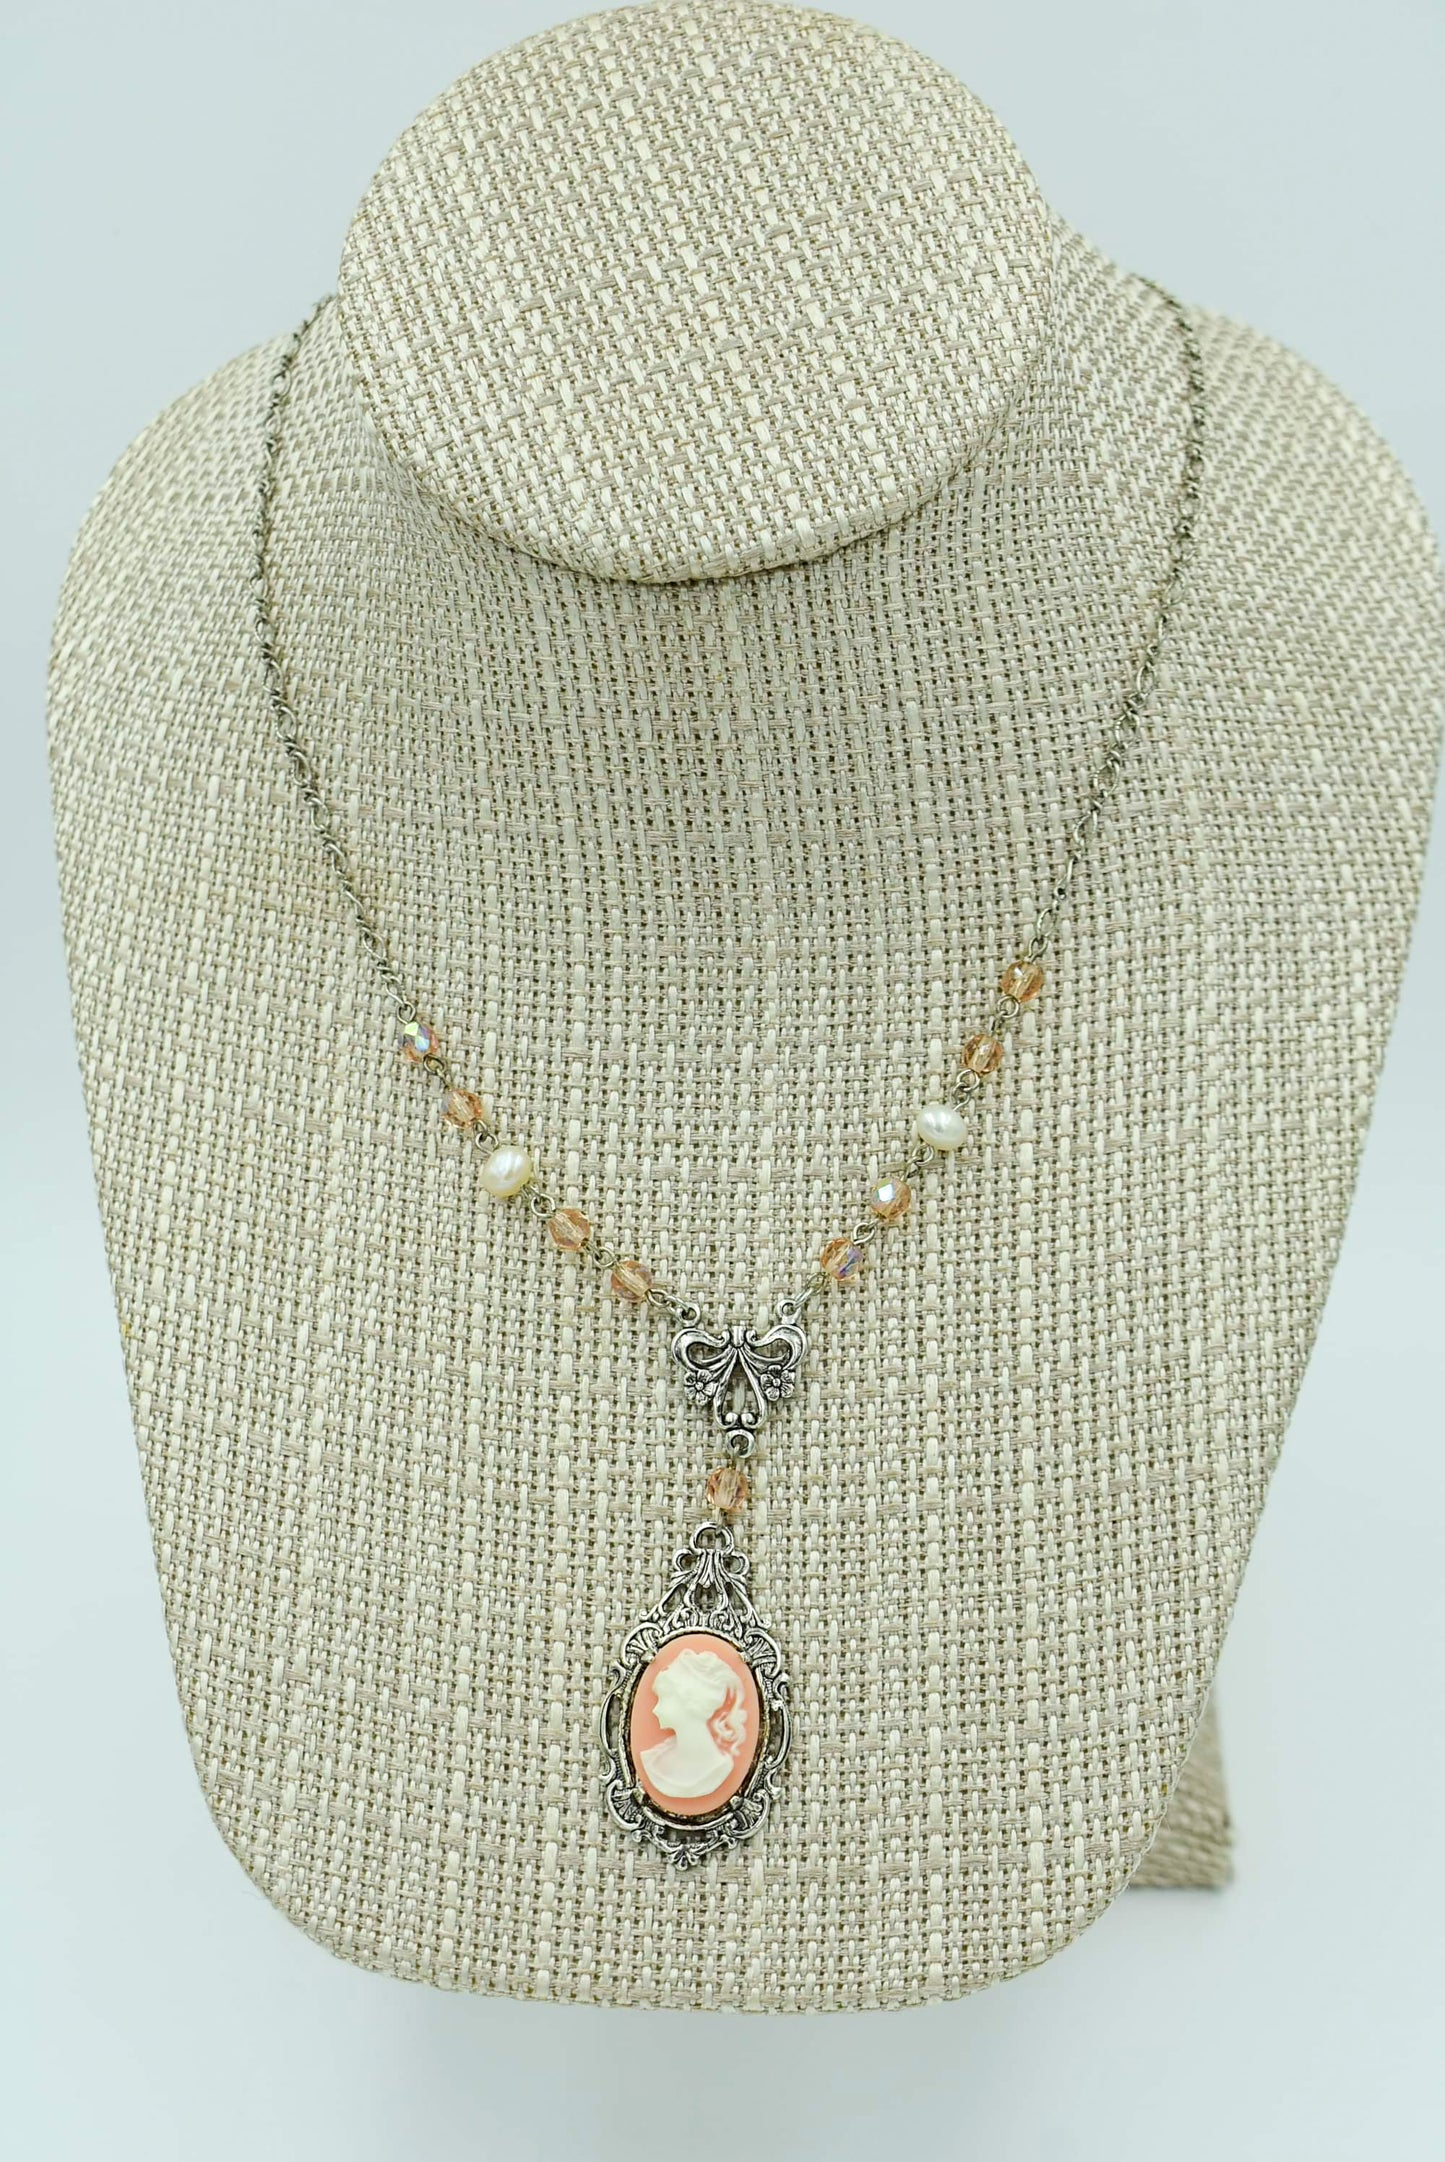 Victorian Cameo Necklace - Pink & Silver